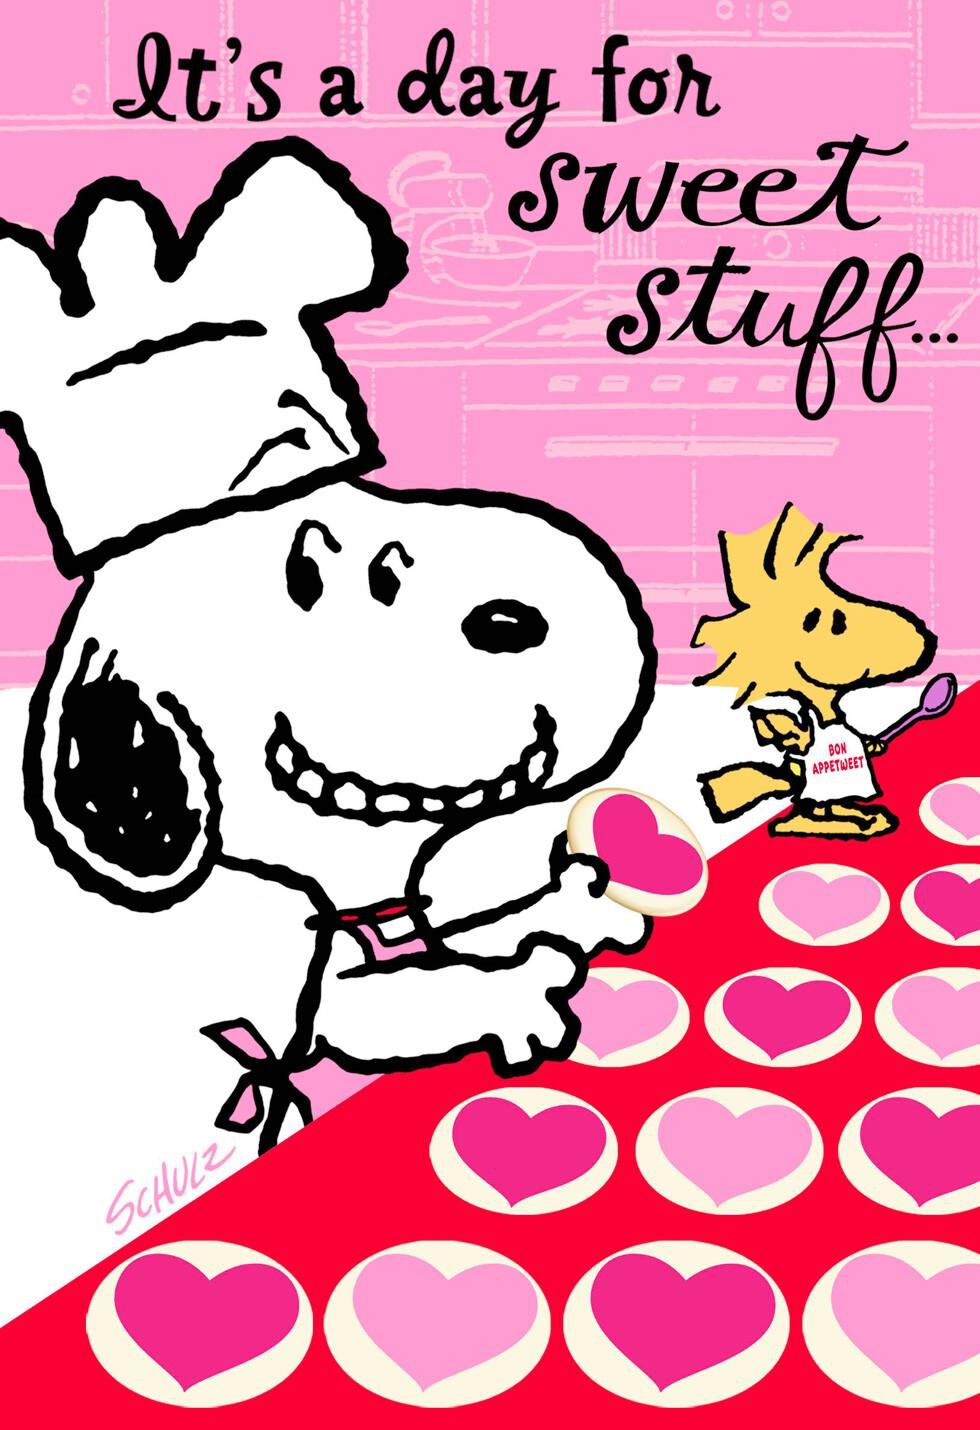 Snoopy Thinking of You Sweetest Day Card Sweetest Day Greeting Cards